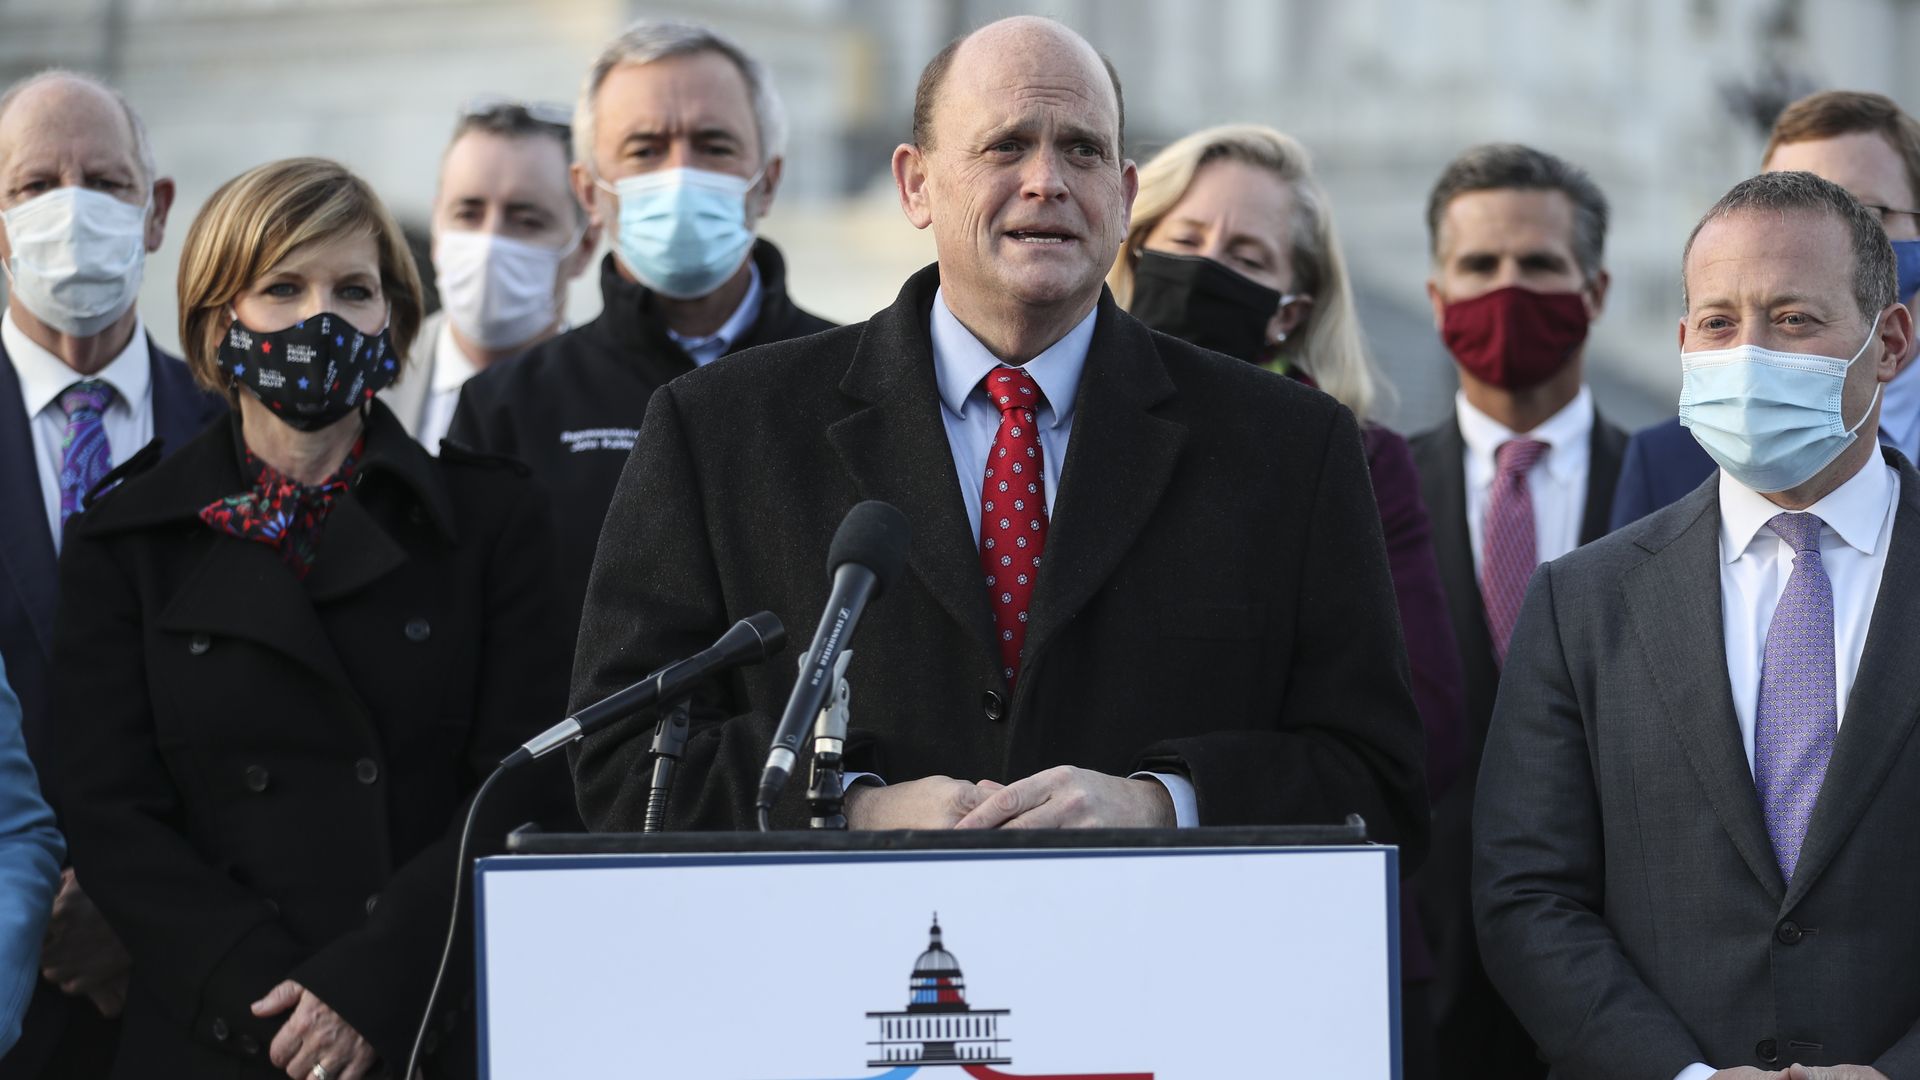 Rep. Tom Reed is seen speaking during a news conference on Capitol Hill.